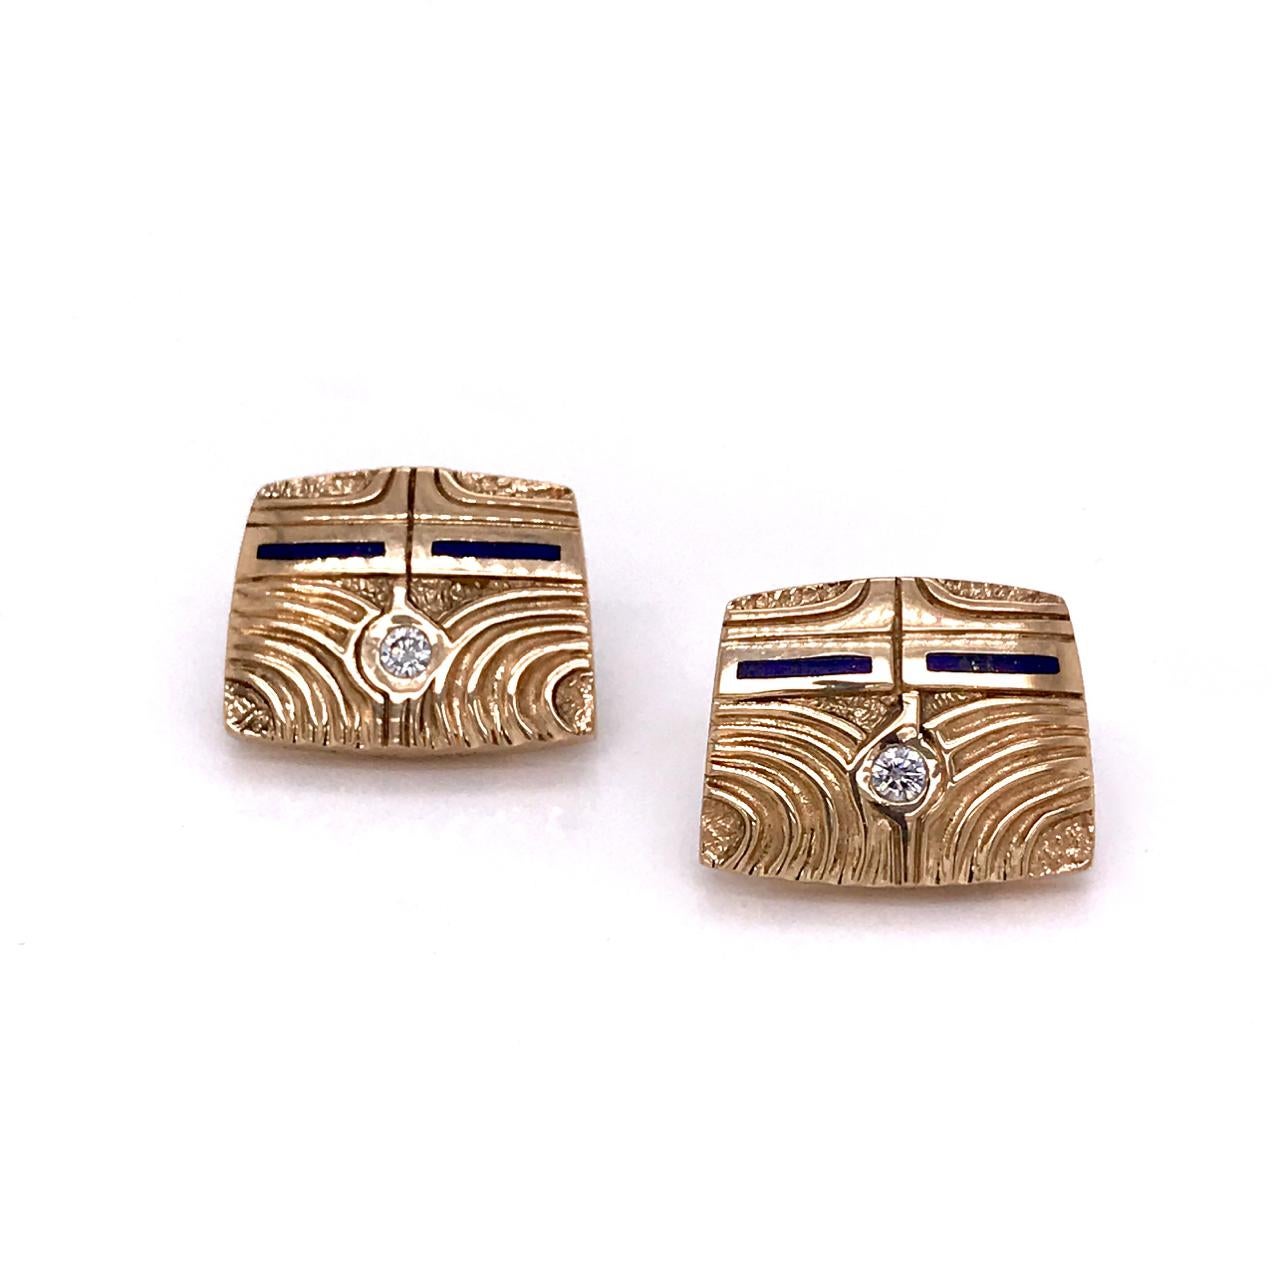 A wonderful pair of 14k gold earrings by Ray Tracey Knifewing.

Each set with a round cut diamond and decorated with enamel and hand wrought decoration to the fronts.

Simply a great pair of earrings from a great Native American jewelry